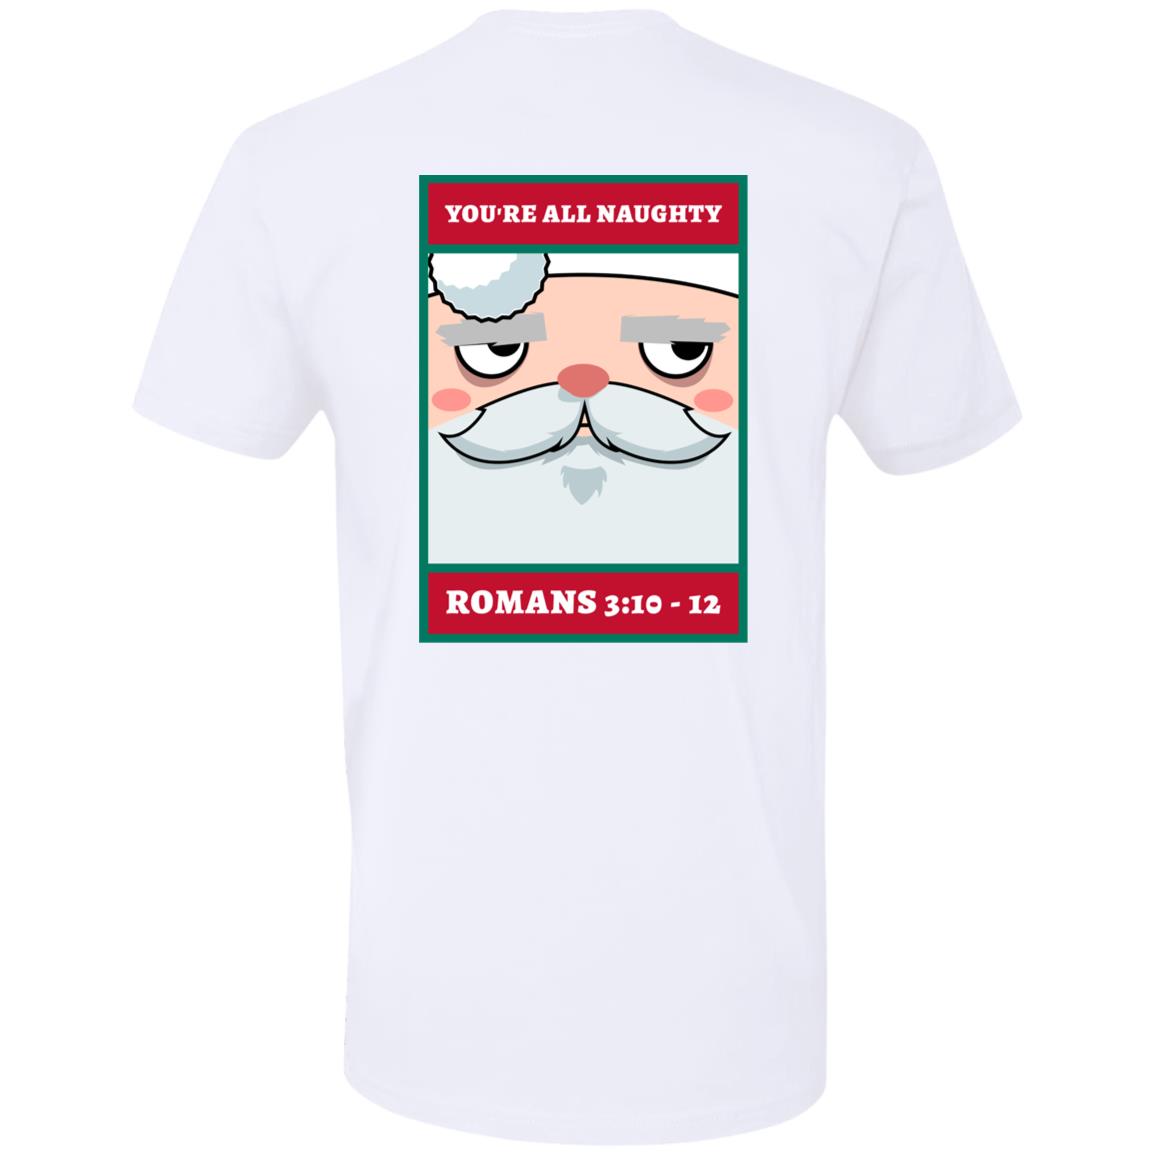 You're All Naughty (Unisex tee)